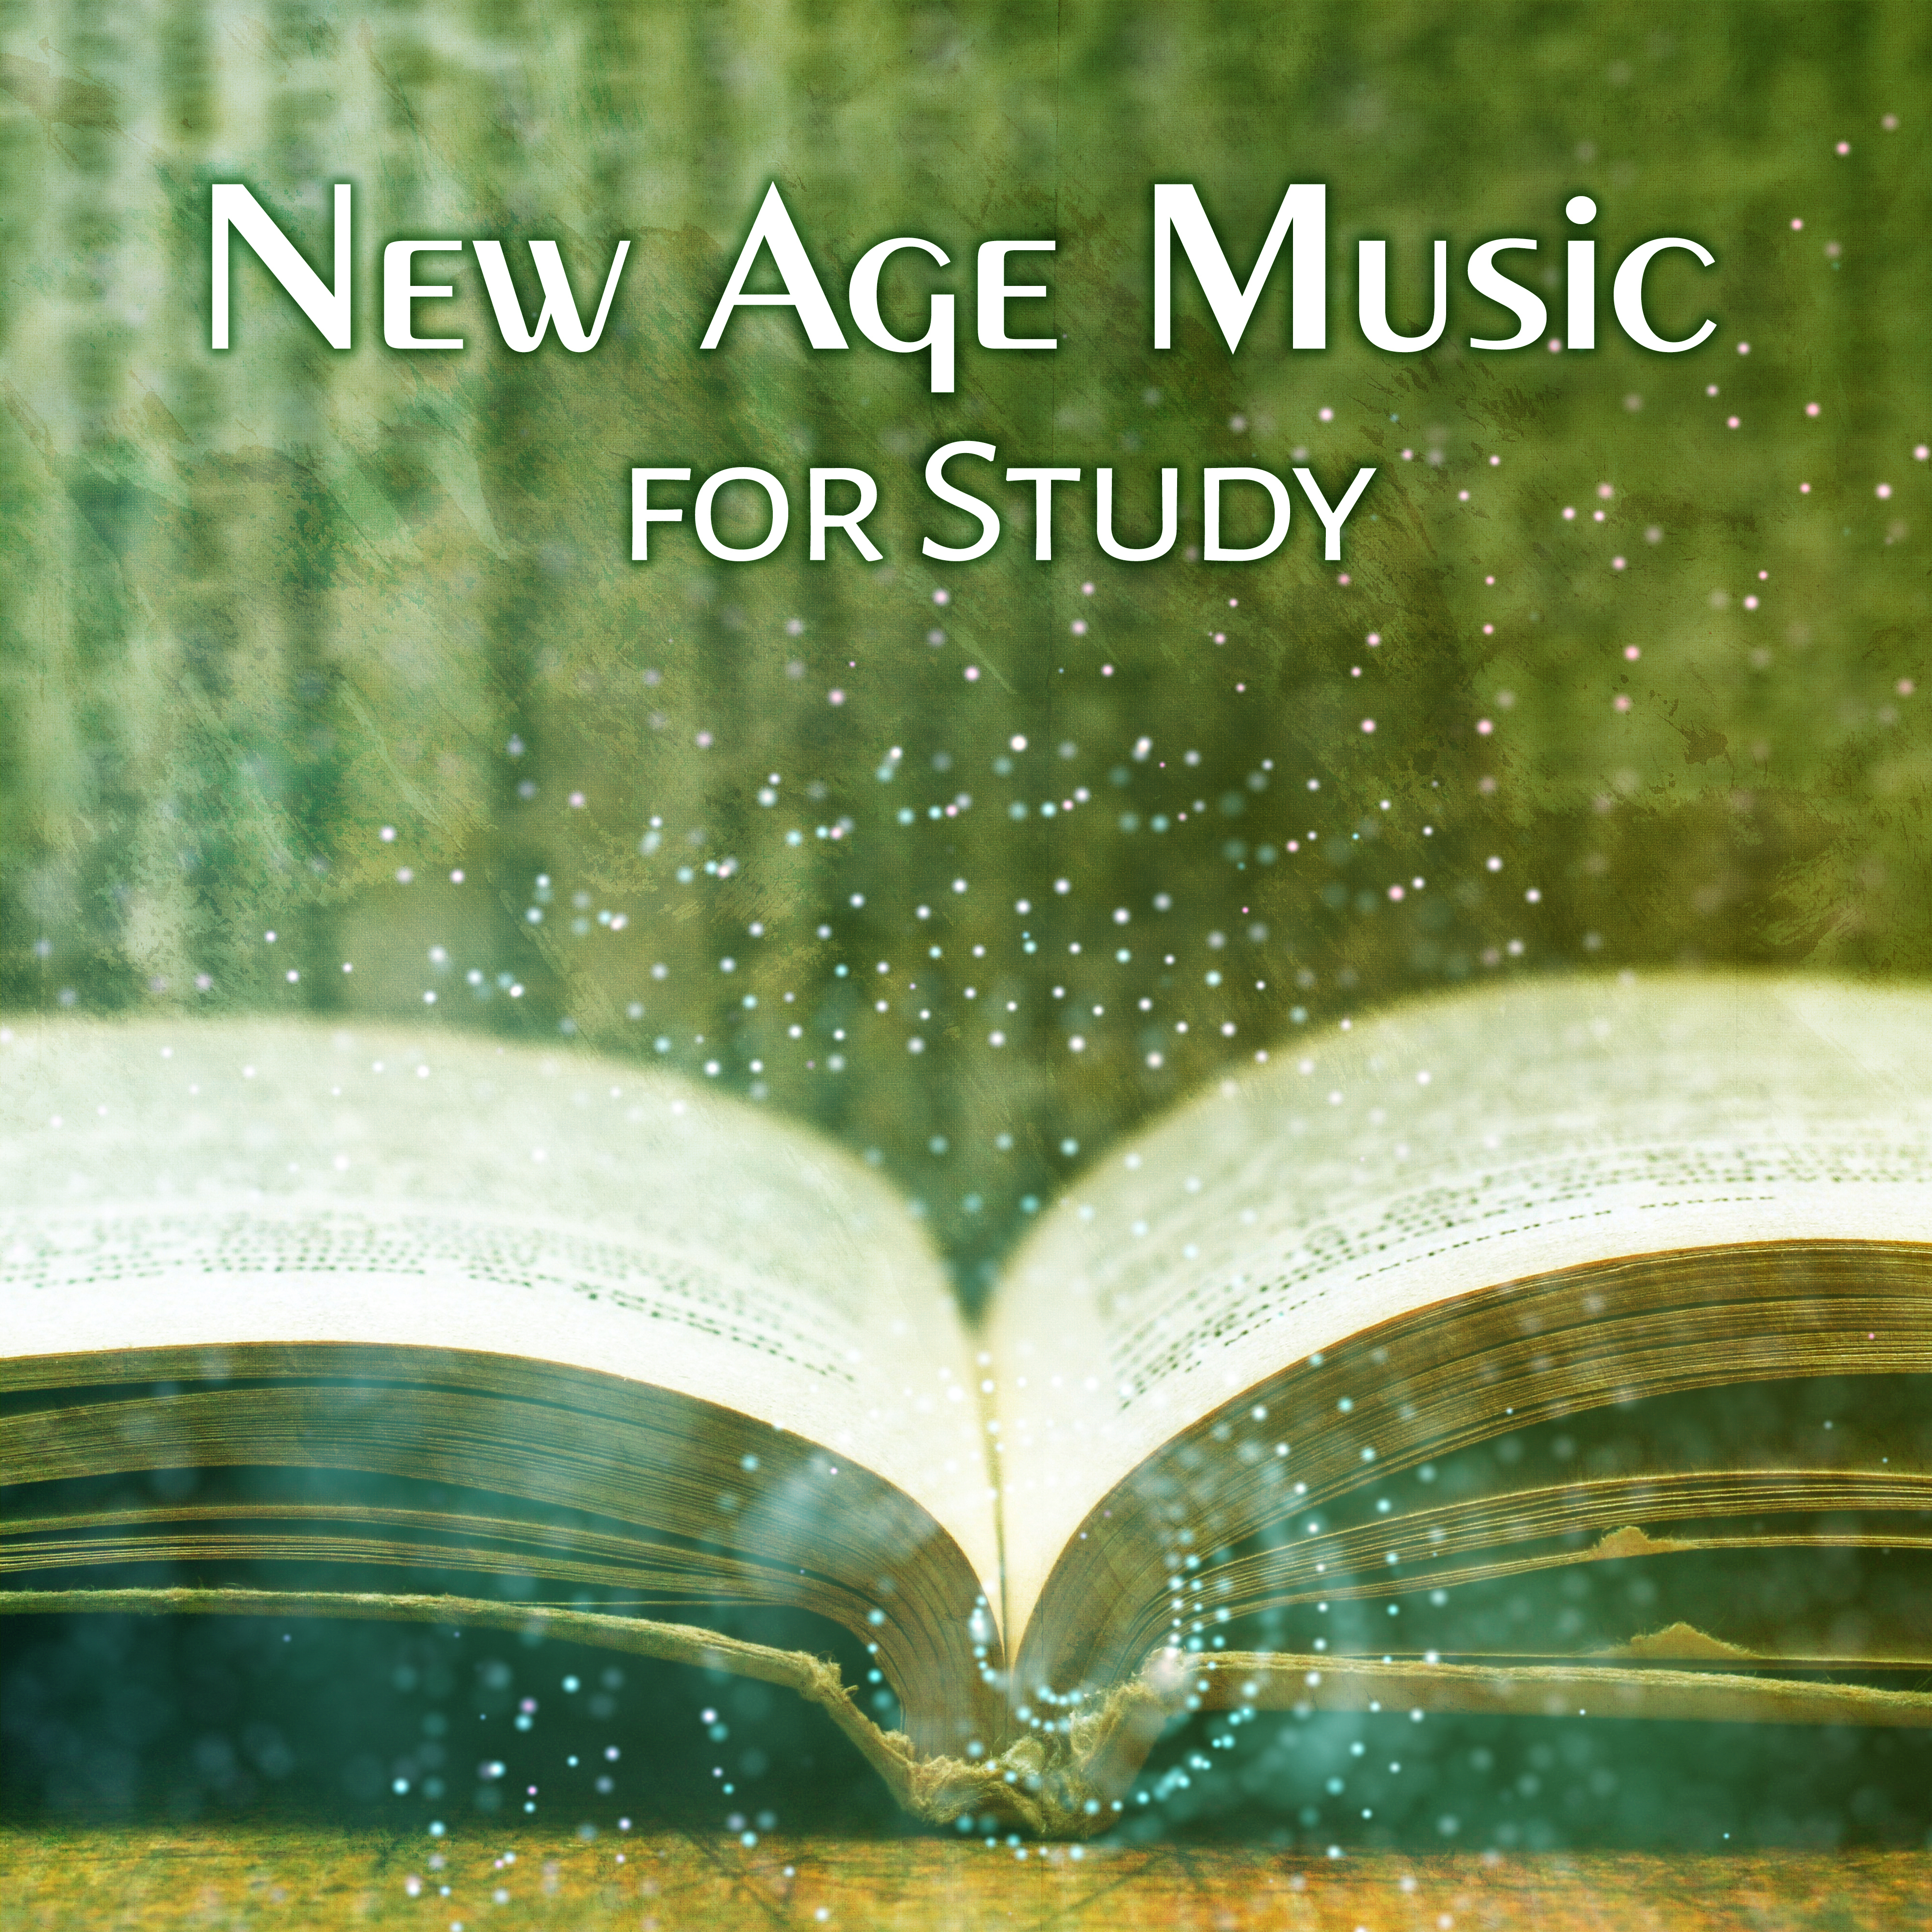 New Age Music for Study  Easy Learning, Deep Focus, Concentration Melodies, Brain Power, Clear Mind, Good Memory